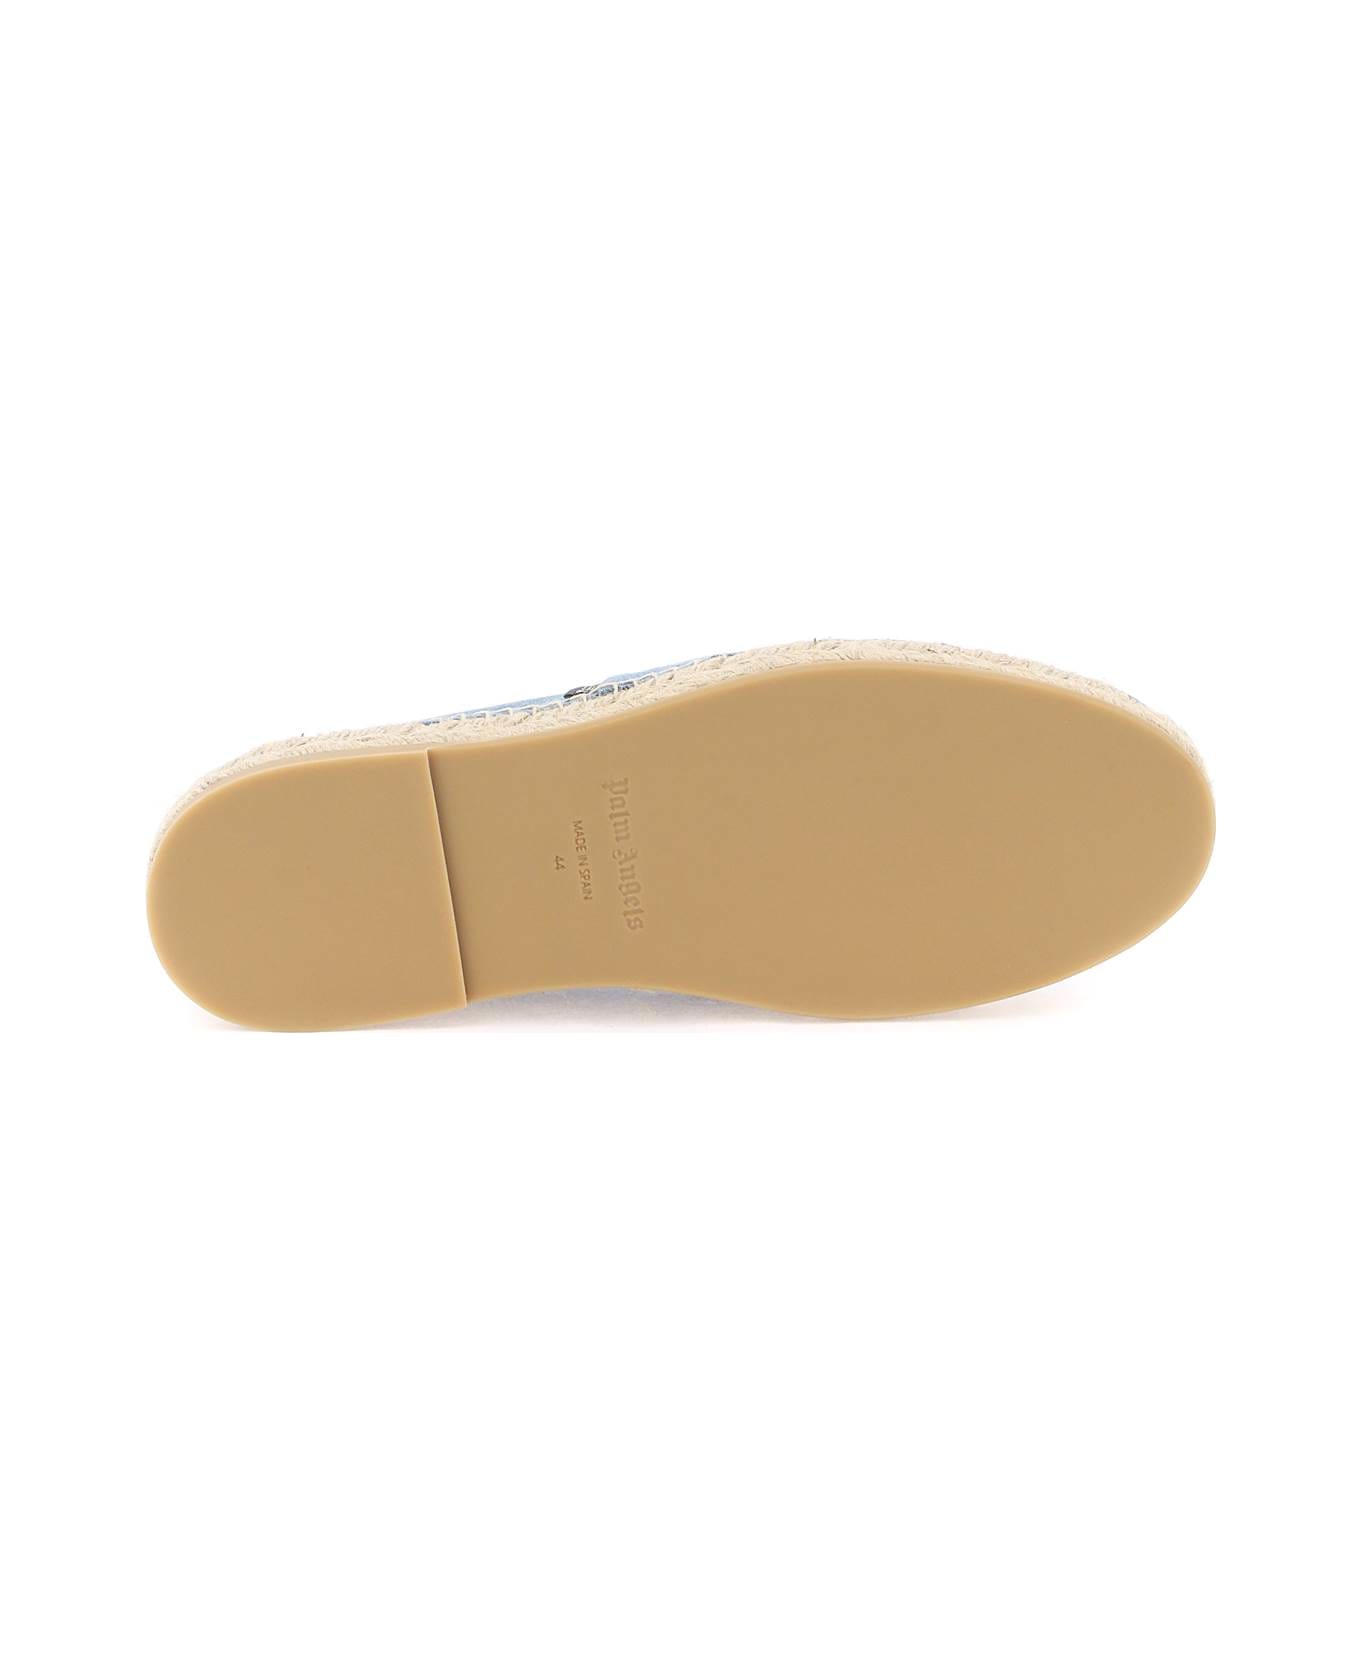 Palm Angels Espadrilles With Embroidered Logo - Blue name:464